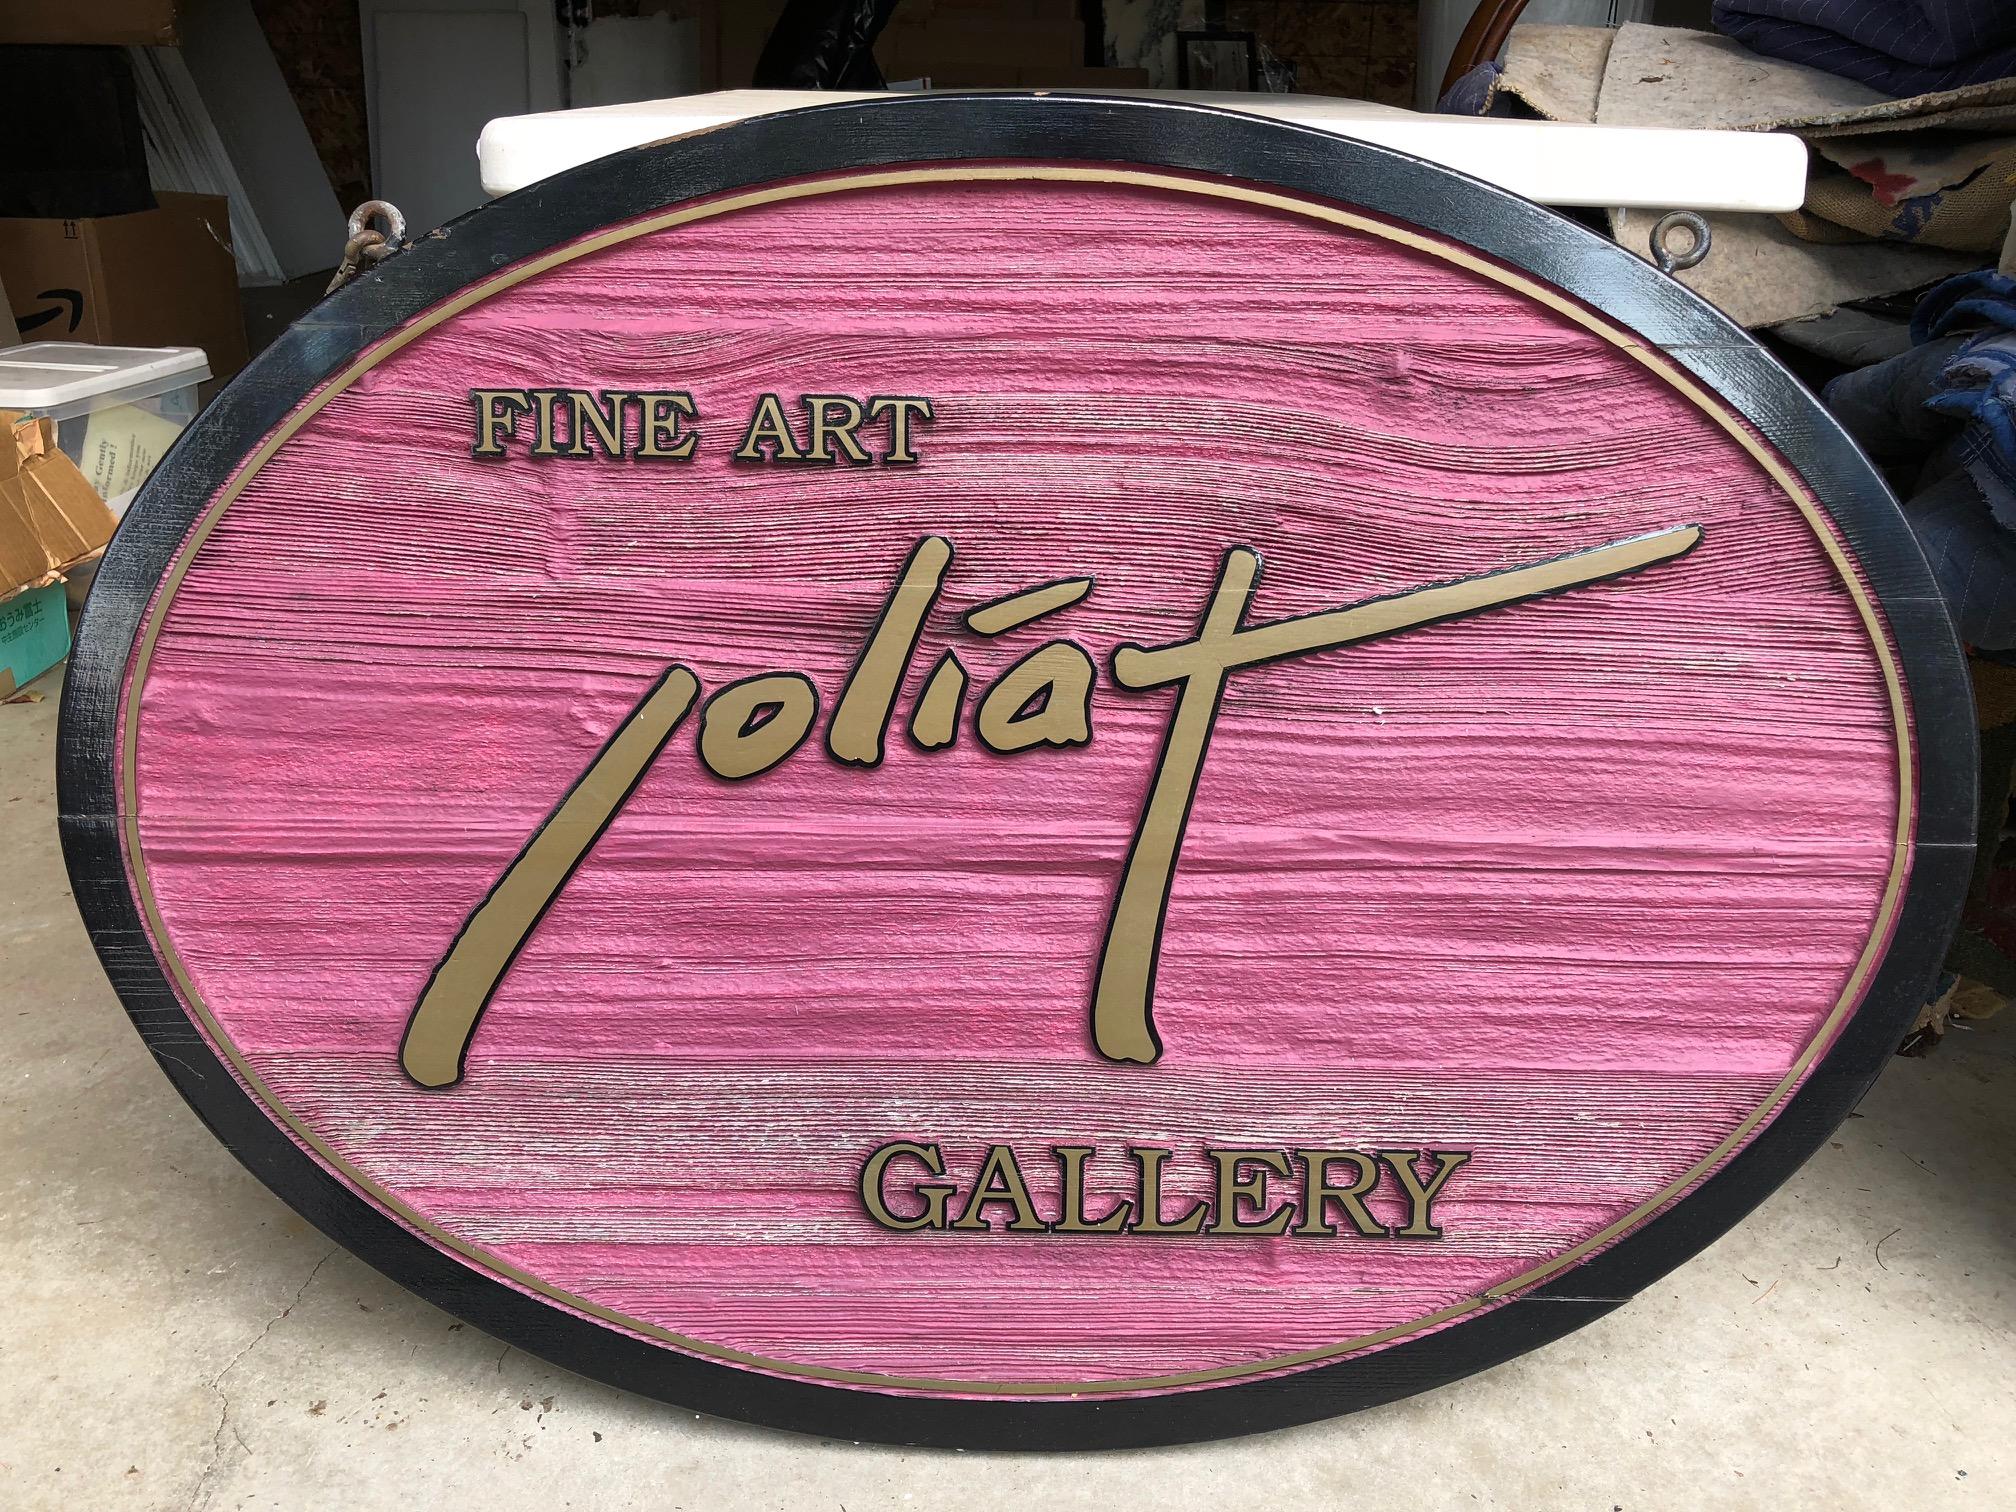 A vintage fine and beautifully handmade, and hand-painted and gold gilt oval shaped two sided gallery shop sign -Joliat Fine ART GALLERY- likely used for an upscale gallery at some time in its past. This was found in Maine.

Measures: 30.5 inches